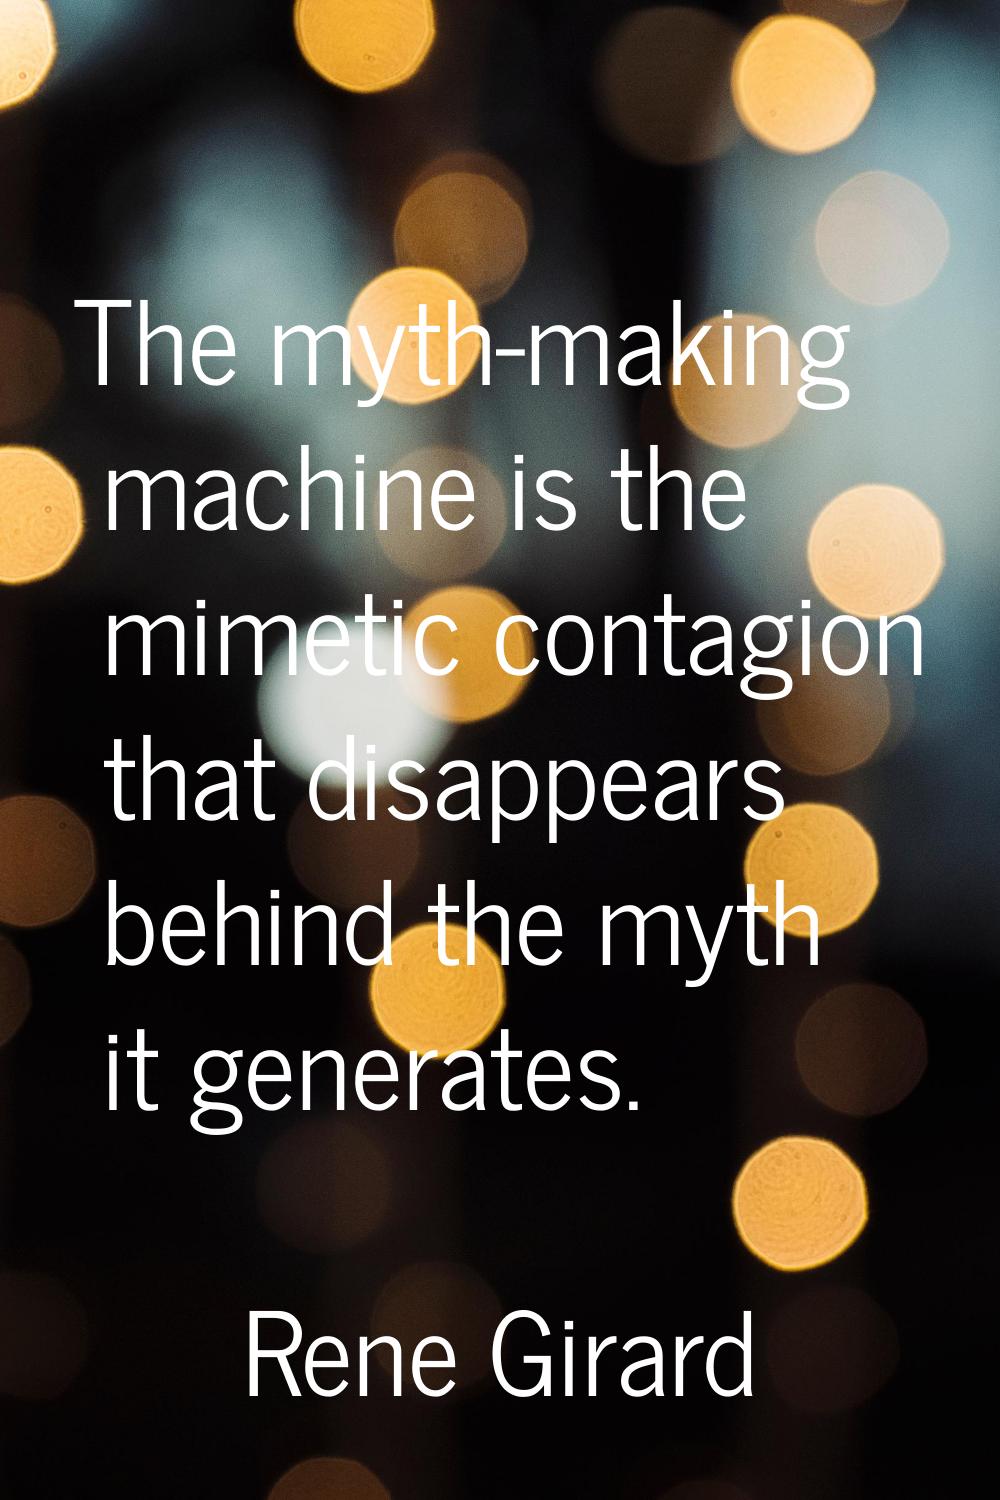 The myth-making machine is the mimetic contagion that disappears behind the myth it generates.